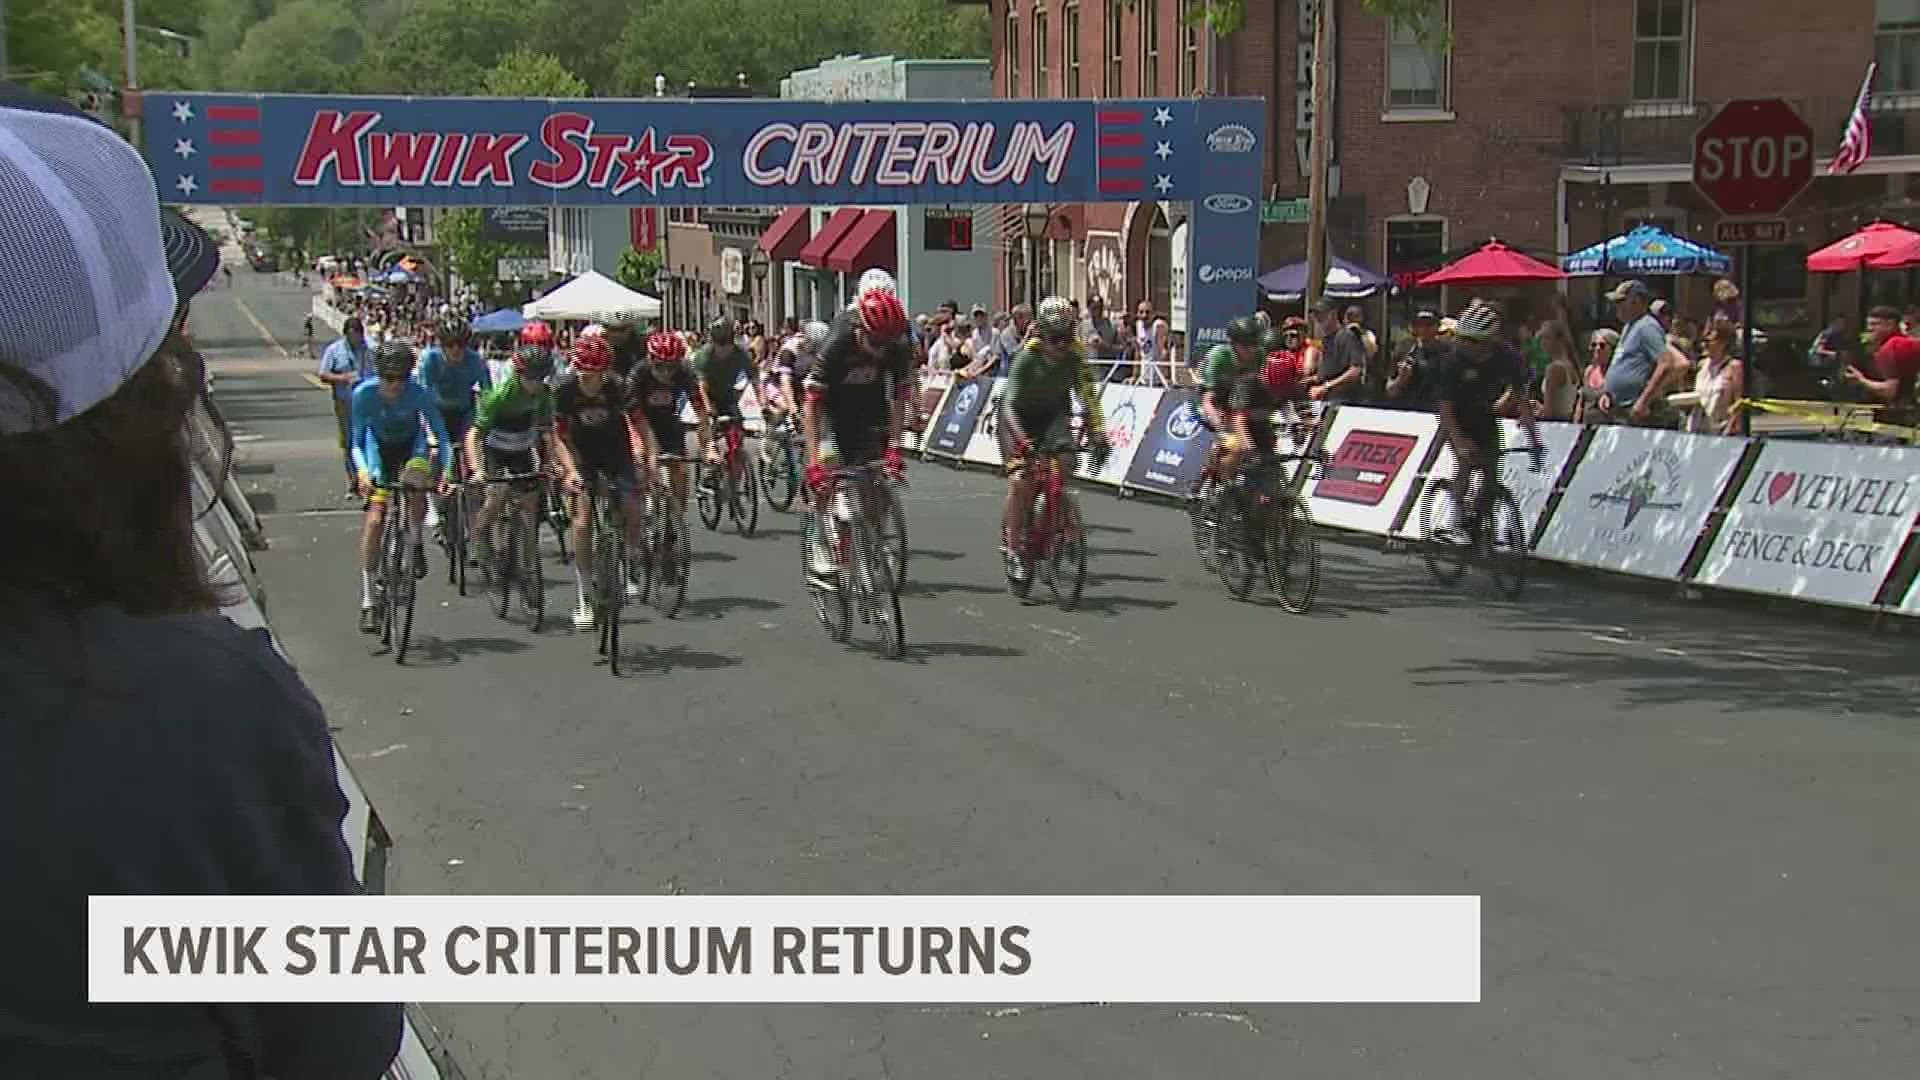 Cyclists raced through the streets of East Davenport as the Kiwk Star Criterium race returned to the Quad Cities after a two-year break.